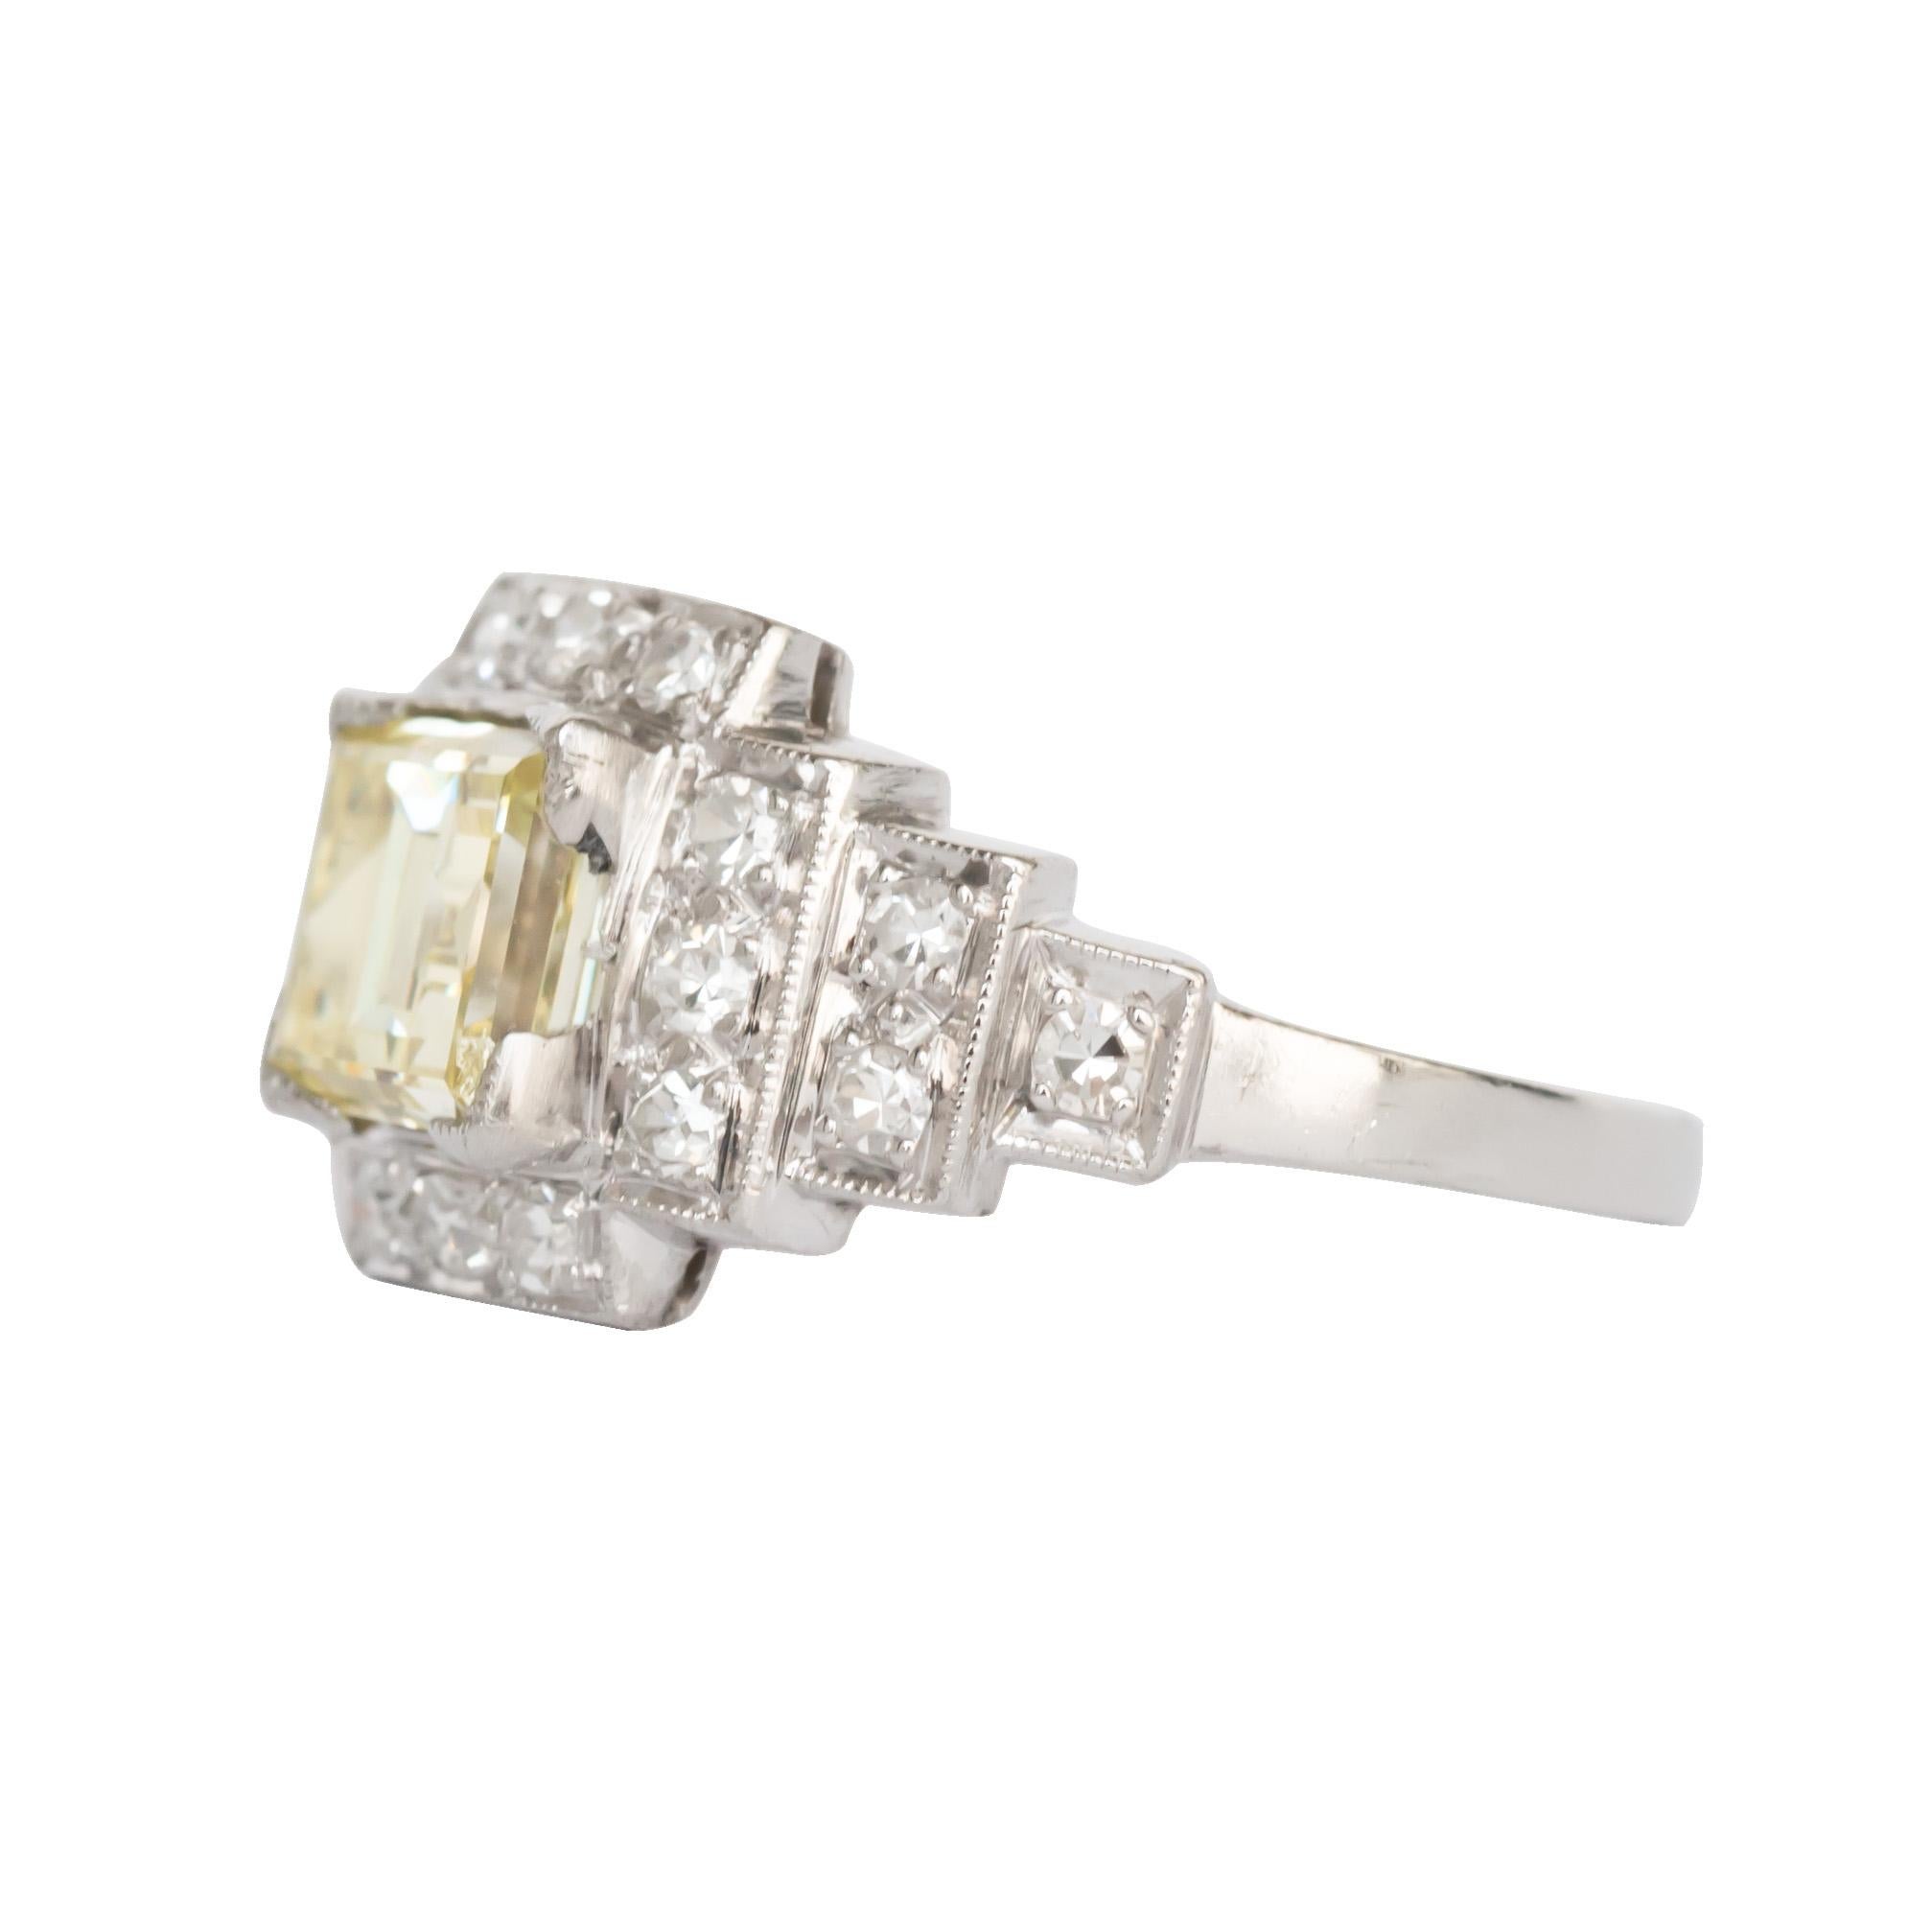 Ring Size: 4.25
Metal Type: Platinum
Weight: 2.6 grams

Center Diamond Details
GIA CERTIFIED Center Diamond - Certificate # 5192597980
Shape: Square Step Cut 
Carat Weight: 1.09 carat
Color: Natural, Fancy Yellow, Even
Clarity: VS1

Side Stone